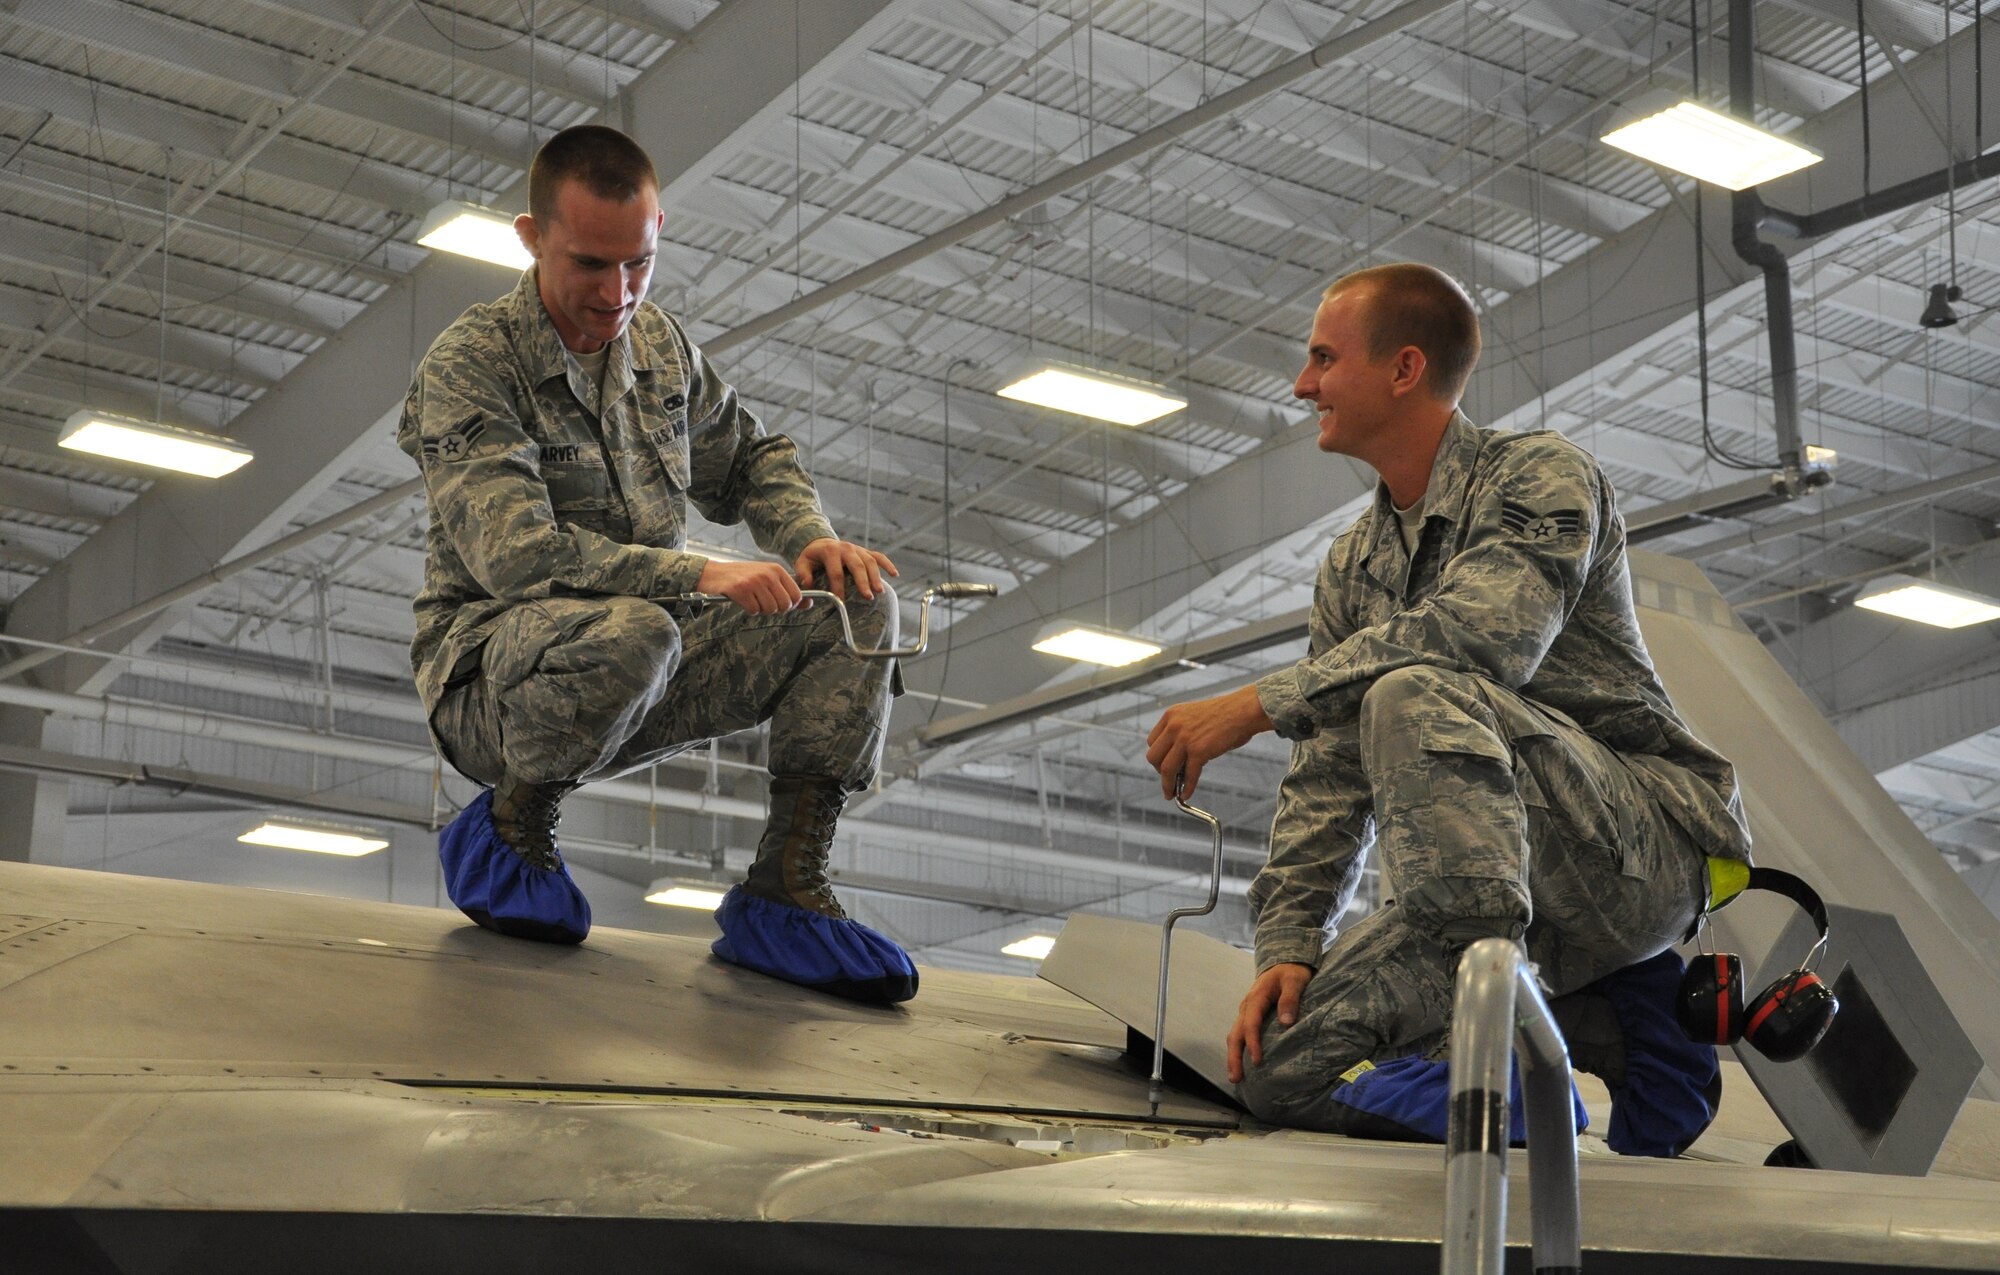 Senior Airman Christopher Dunn, 43rd Aircraft Maintenance Unit F-22 specialist and Airman 1st Class Kenan Harvey, 43rd AMU F-22 specialist, address an issue on top of an F-22 Raptor as part of Avionics Health of the Fleet inside the hangar of the 43rd AMU at Tyndall Air Force Base, Fla. AVHOF is a program implemented to increase the number of fully mission capable F-22s on Tyndall’s flight line. (U.S. Air Force photo by Airman 1st Class Alex Echols)